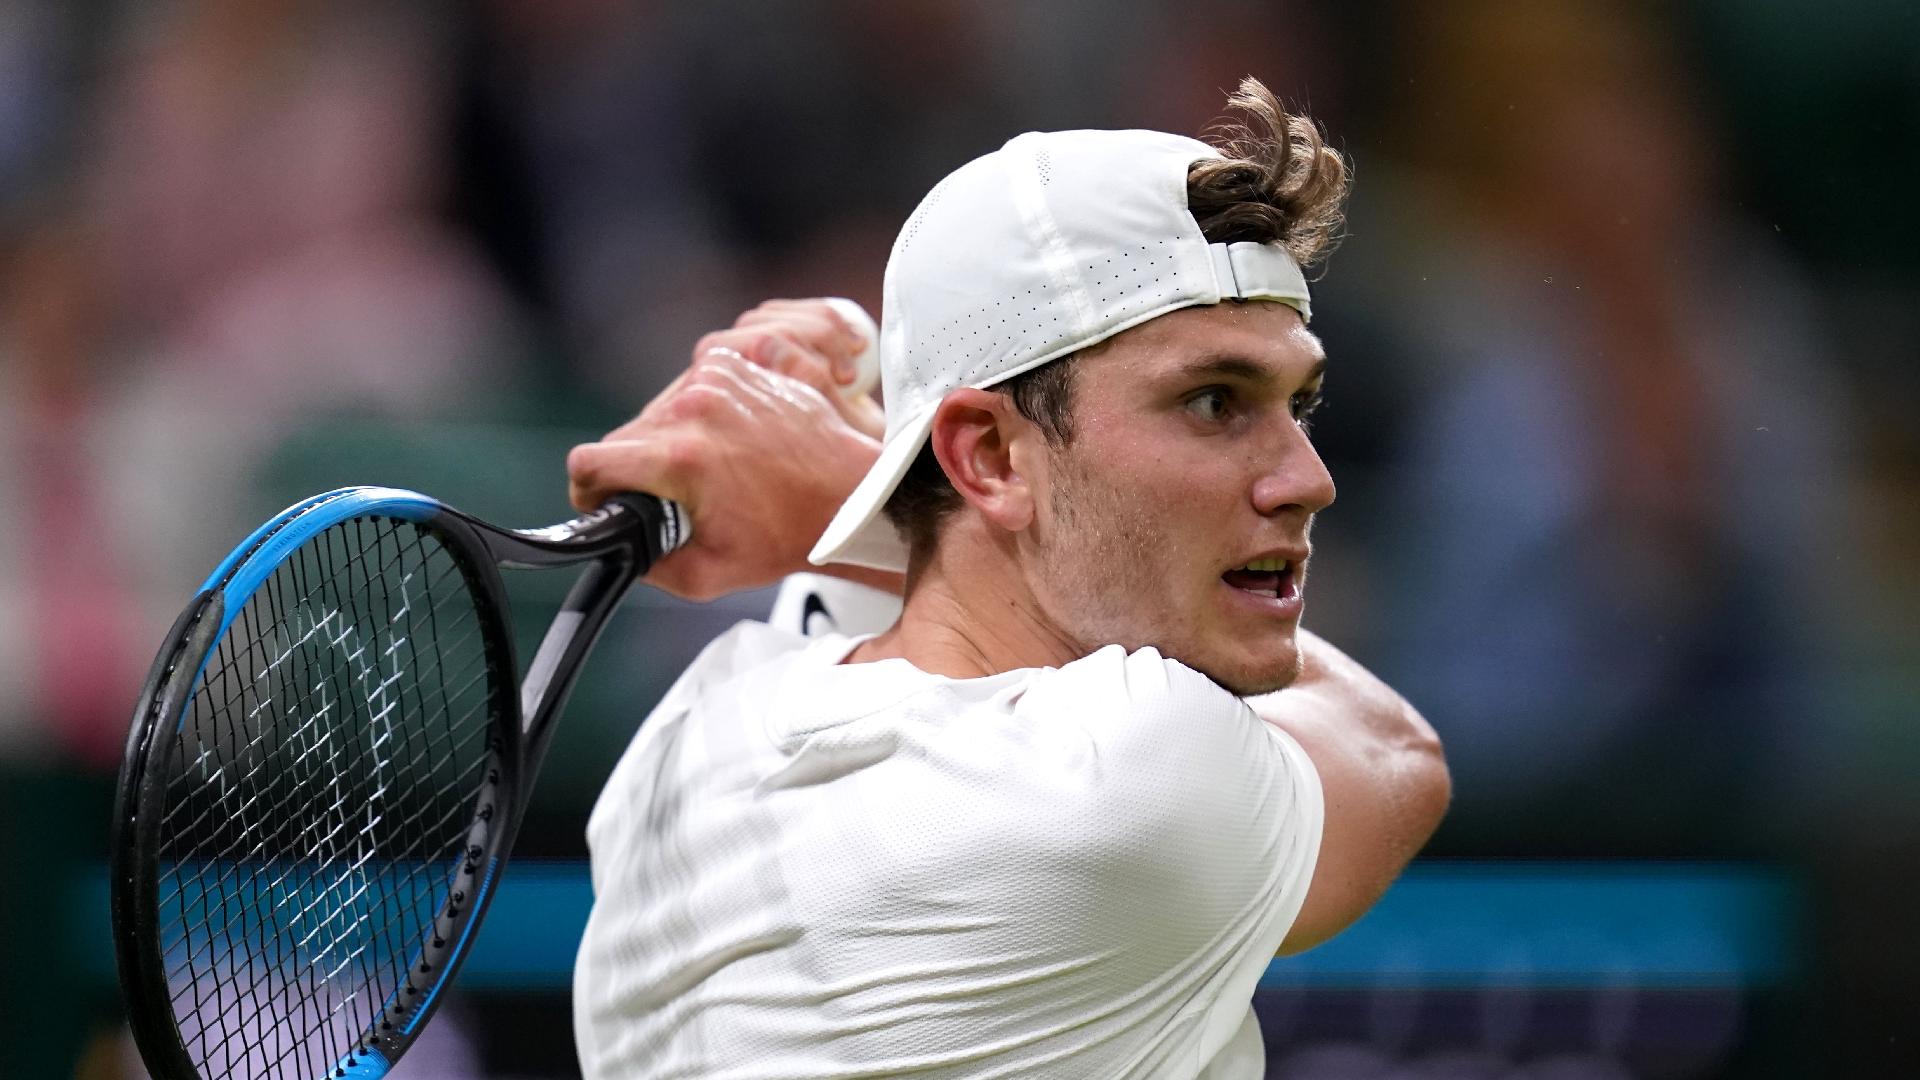 Shoulder injury rules Draper out of Wimbledon beIN SPORTS